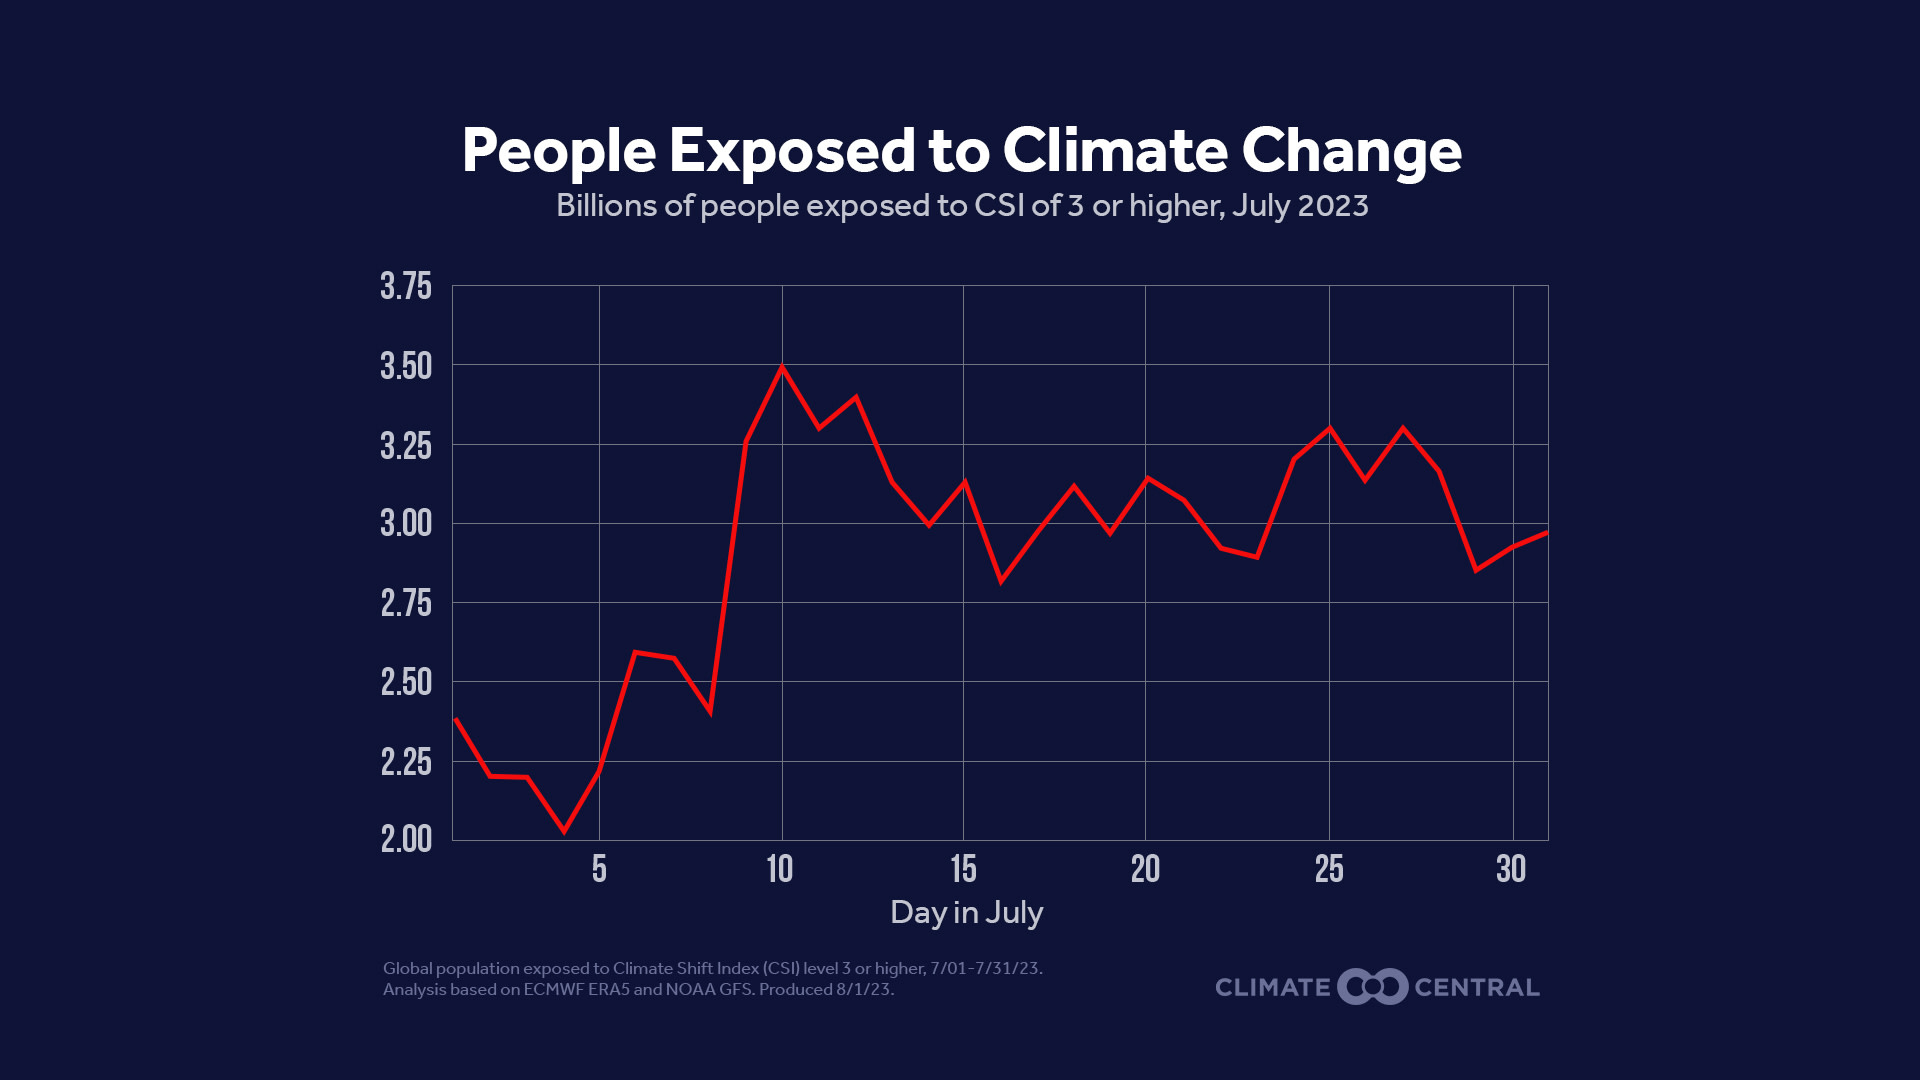 CM: People Exposed to Climate Change in July 2023 (EN)